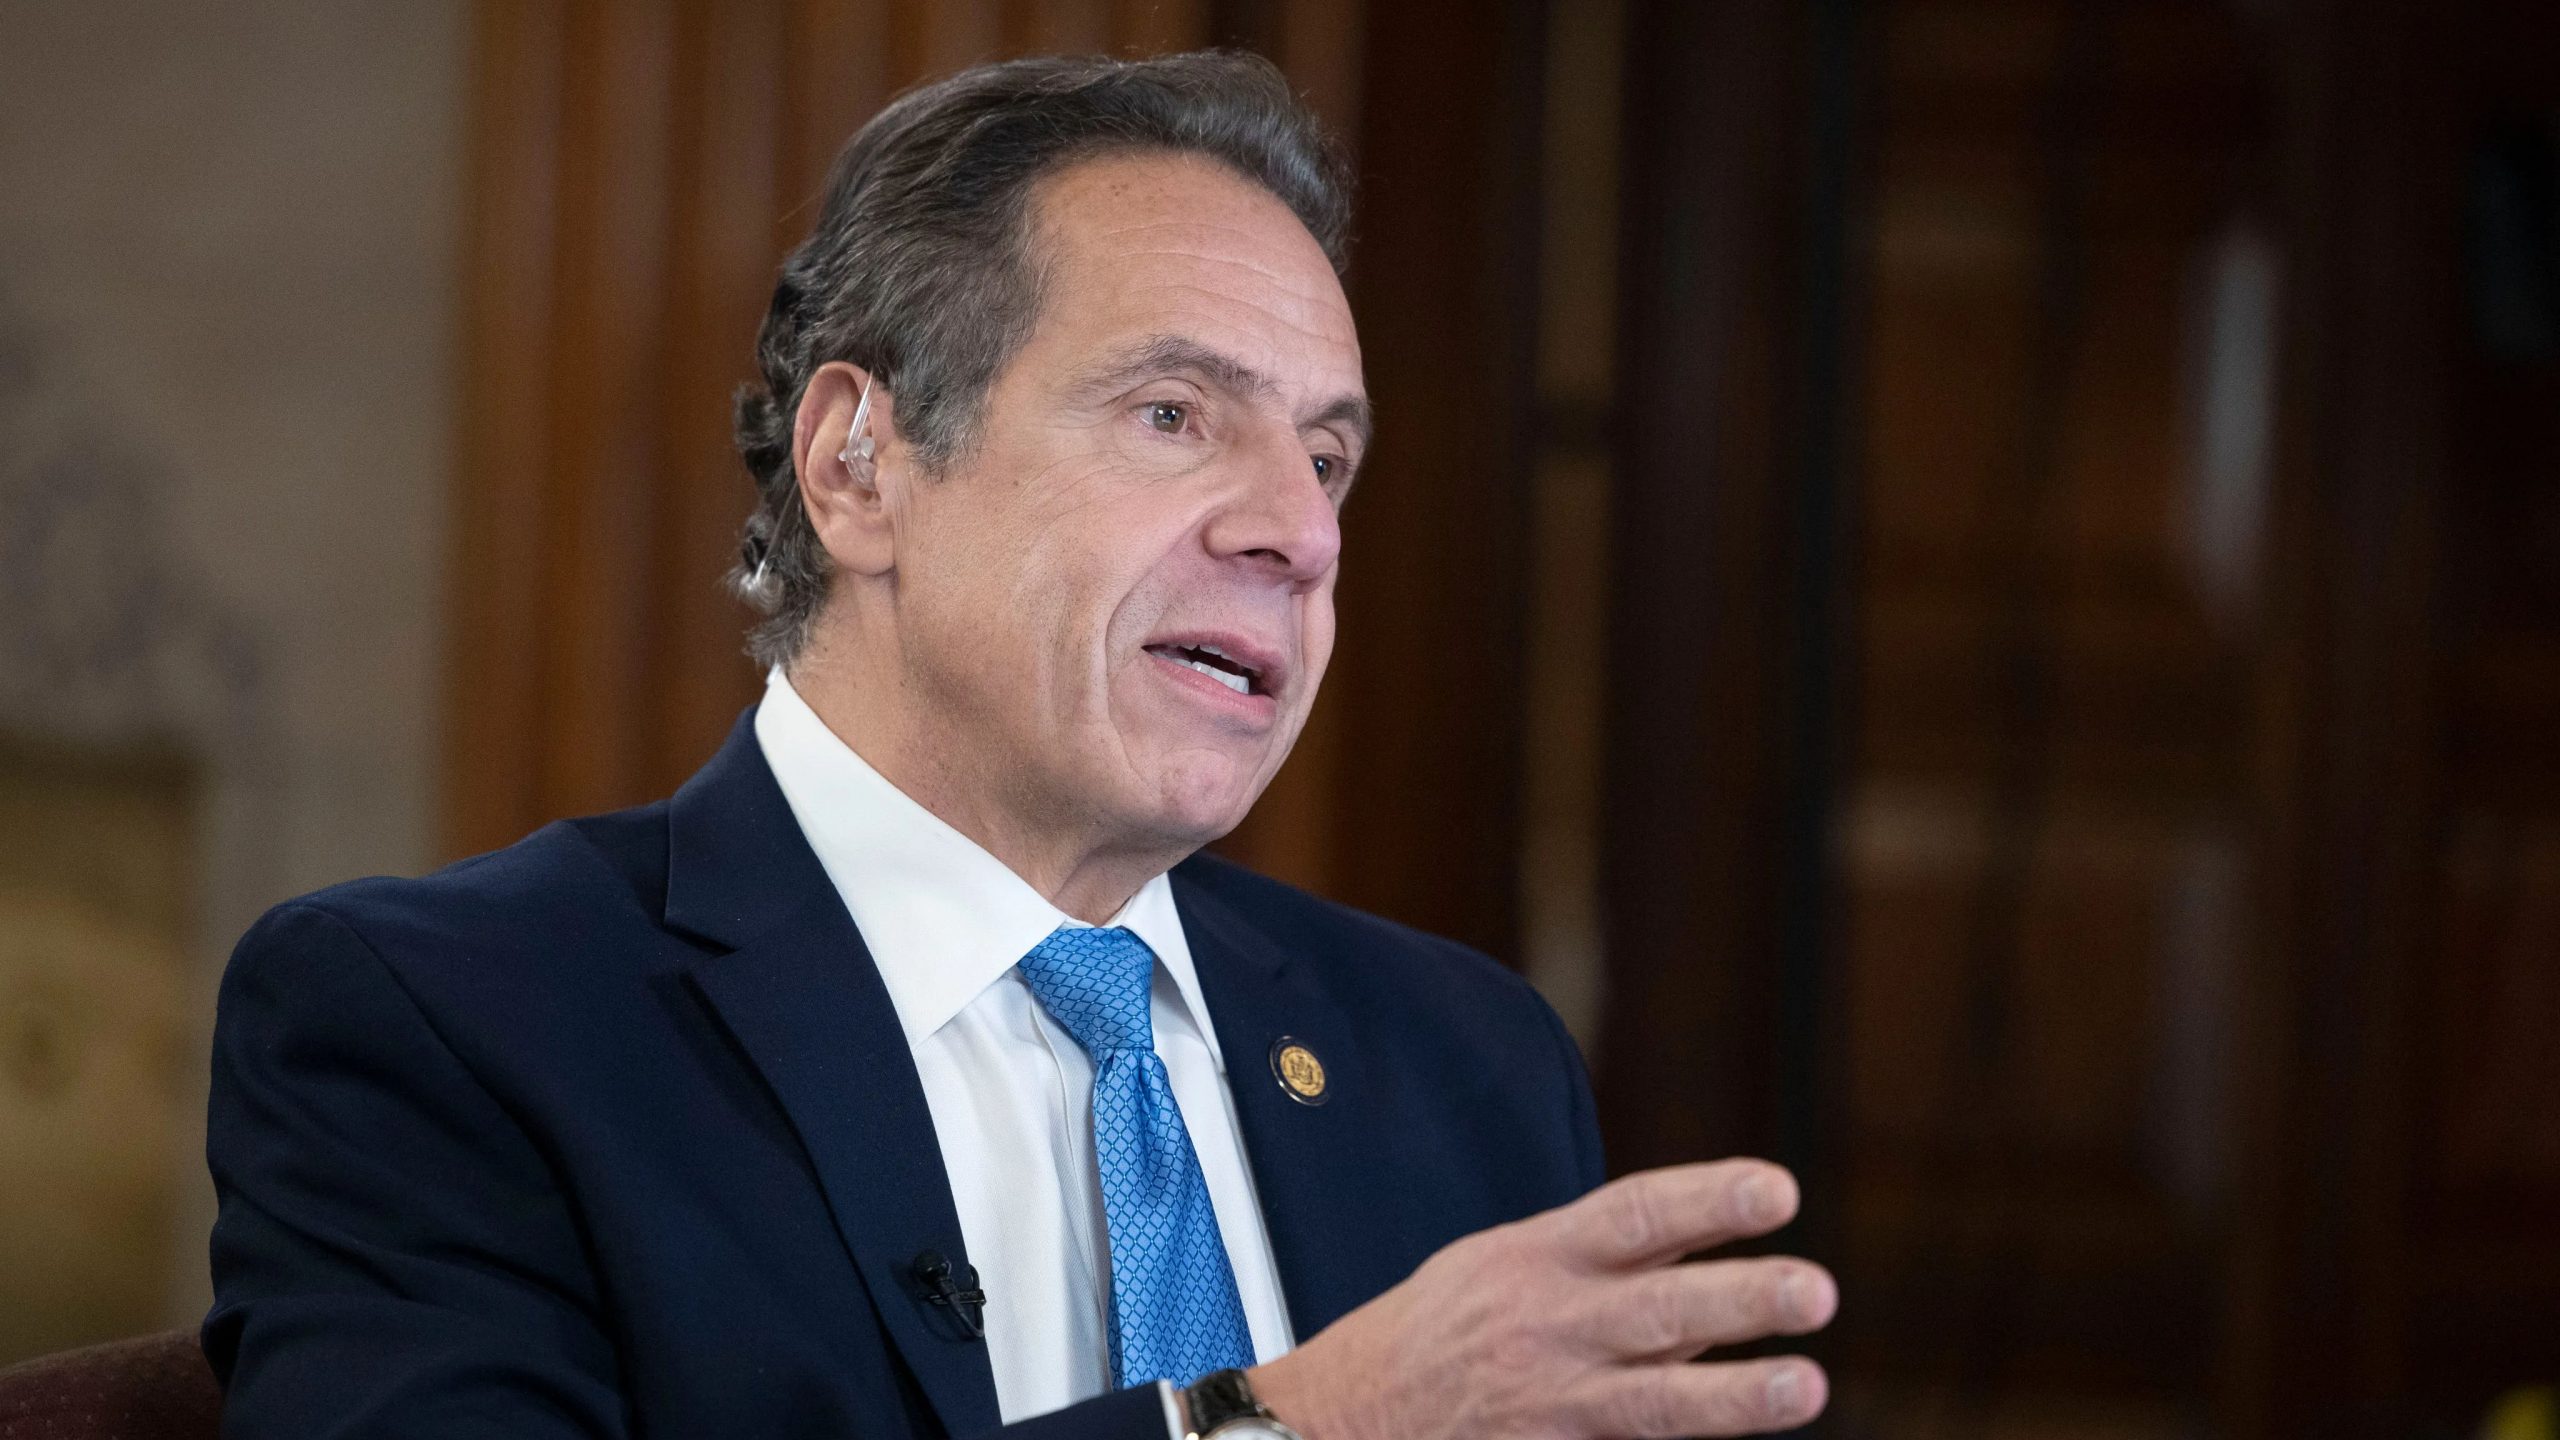 What led to investigation against New York Governor Andrew Cuomo